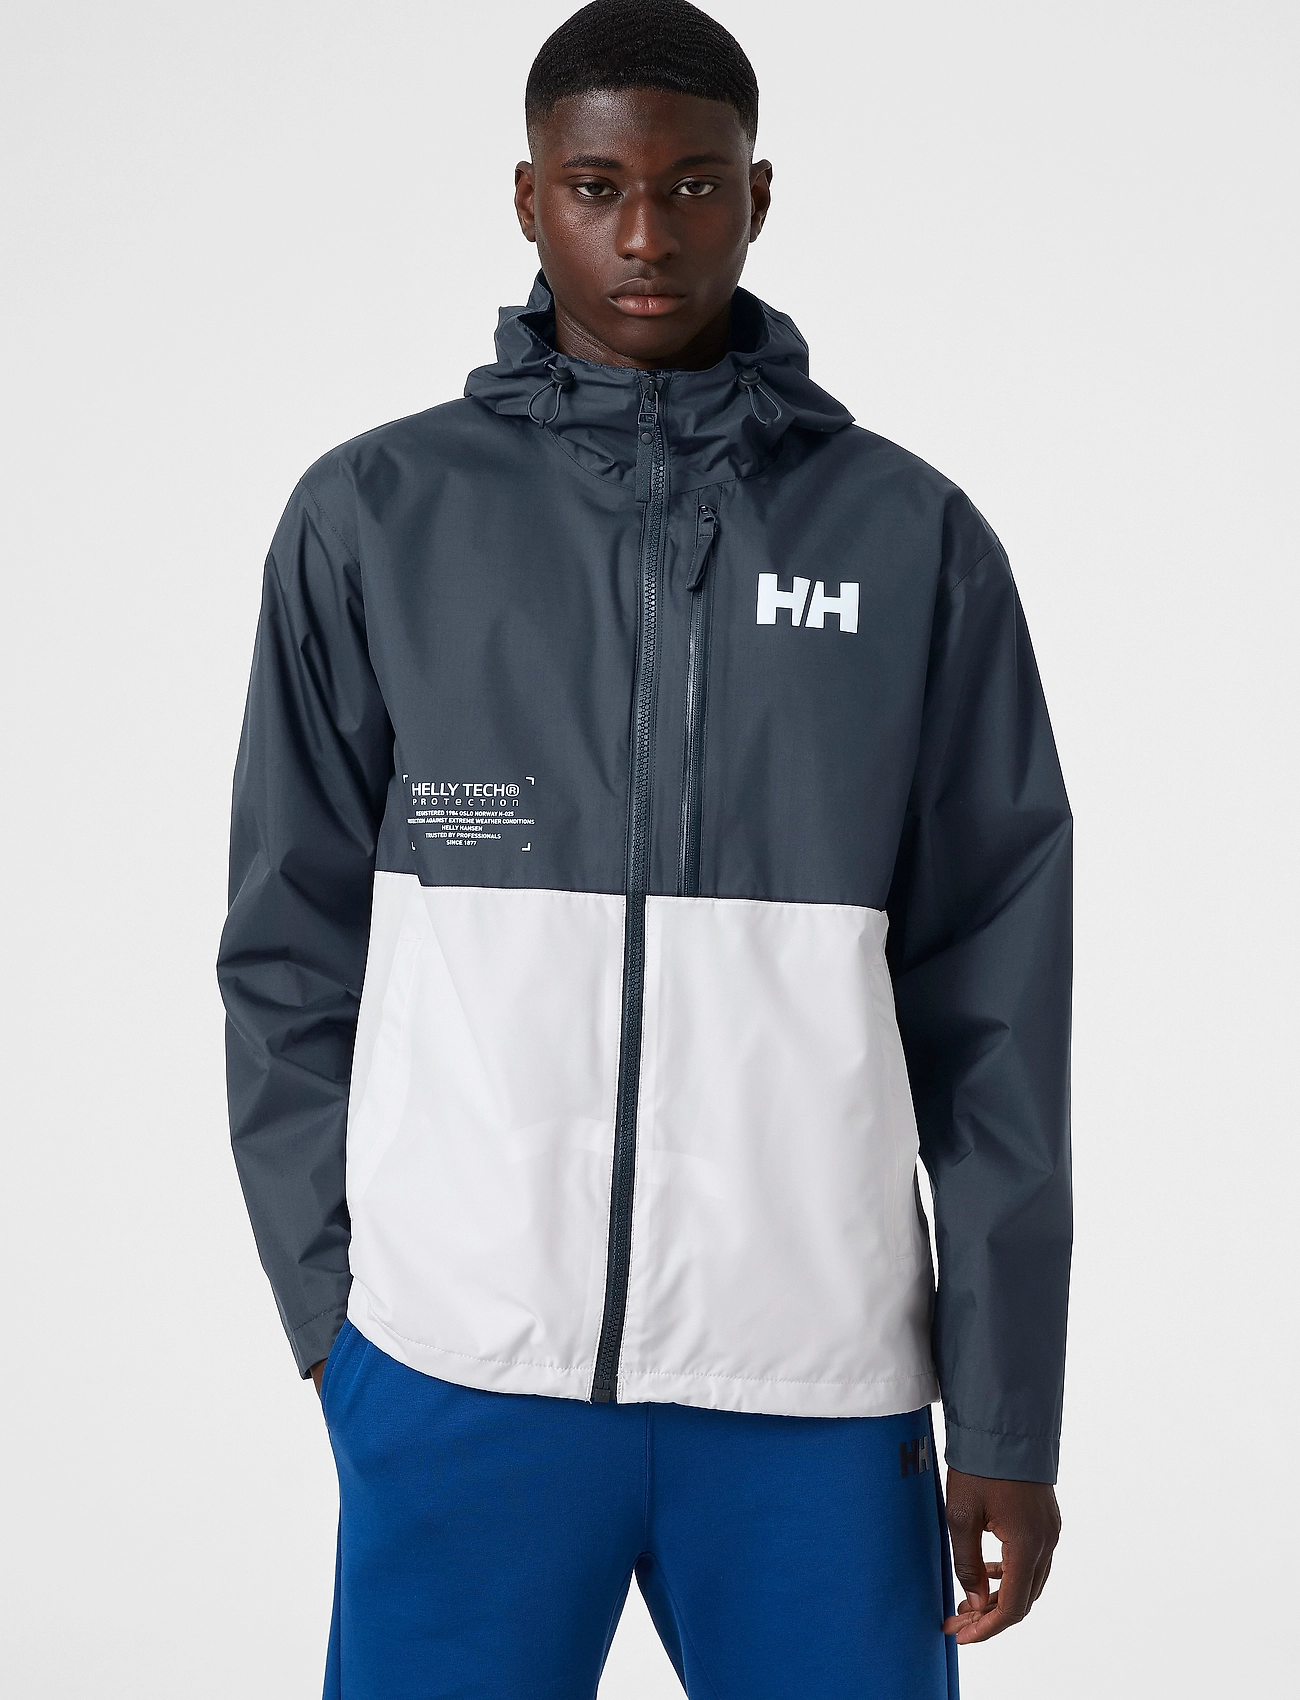 Helly Active Pace Jacket - Boozt.com